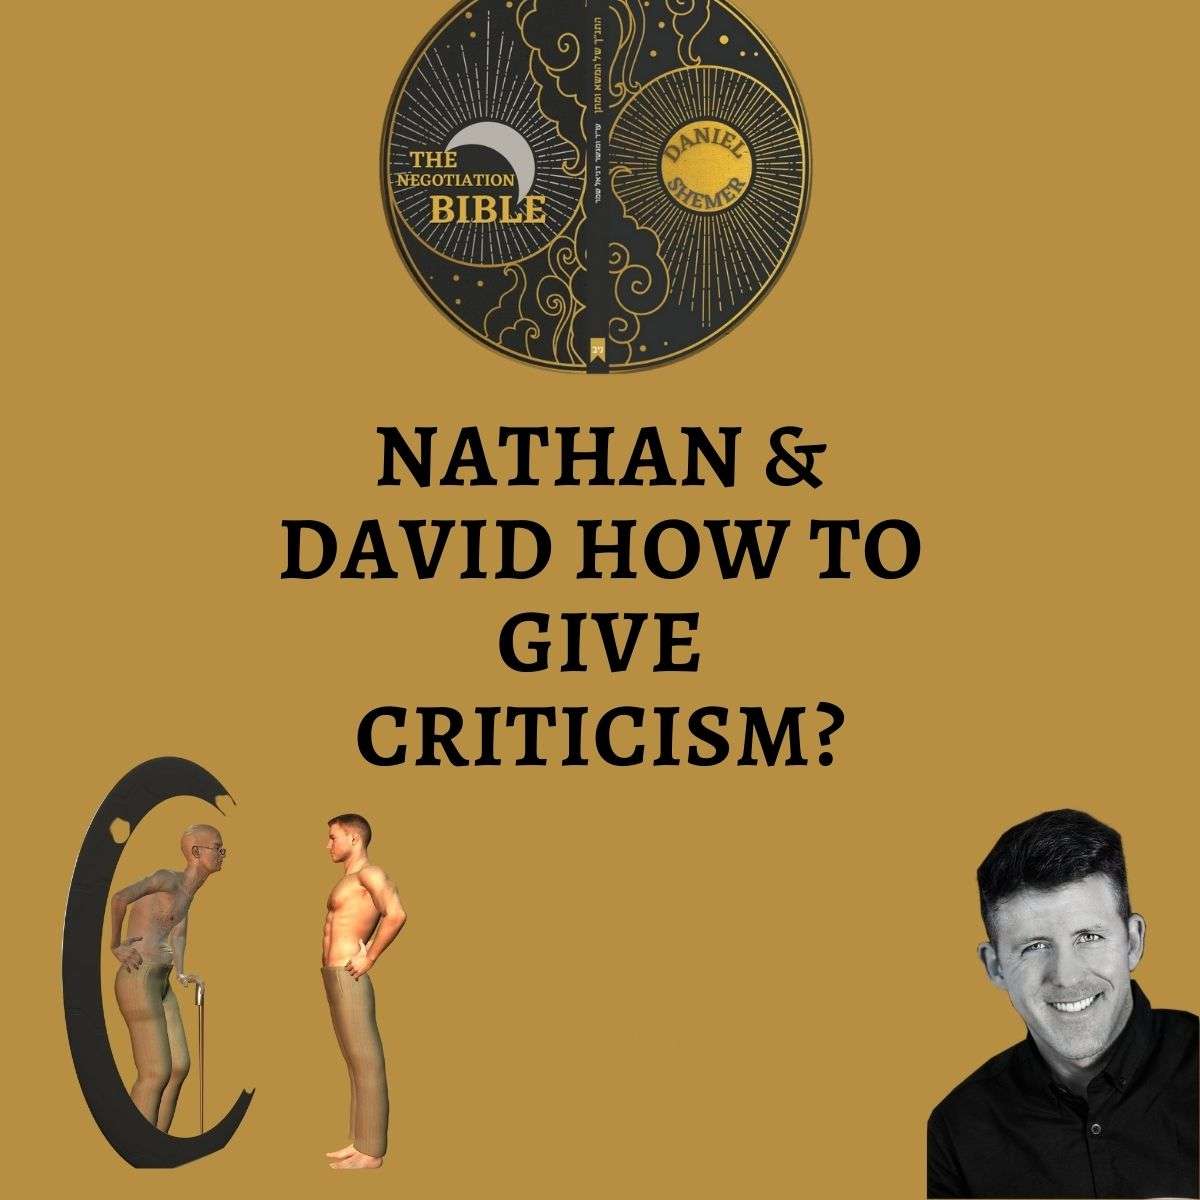 How to give criticism